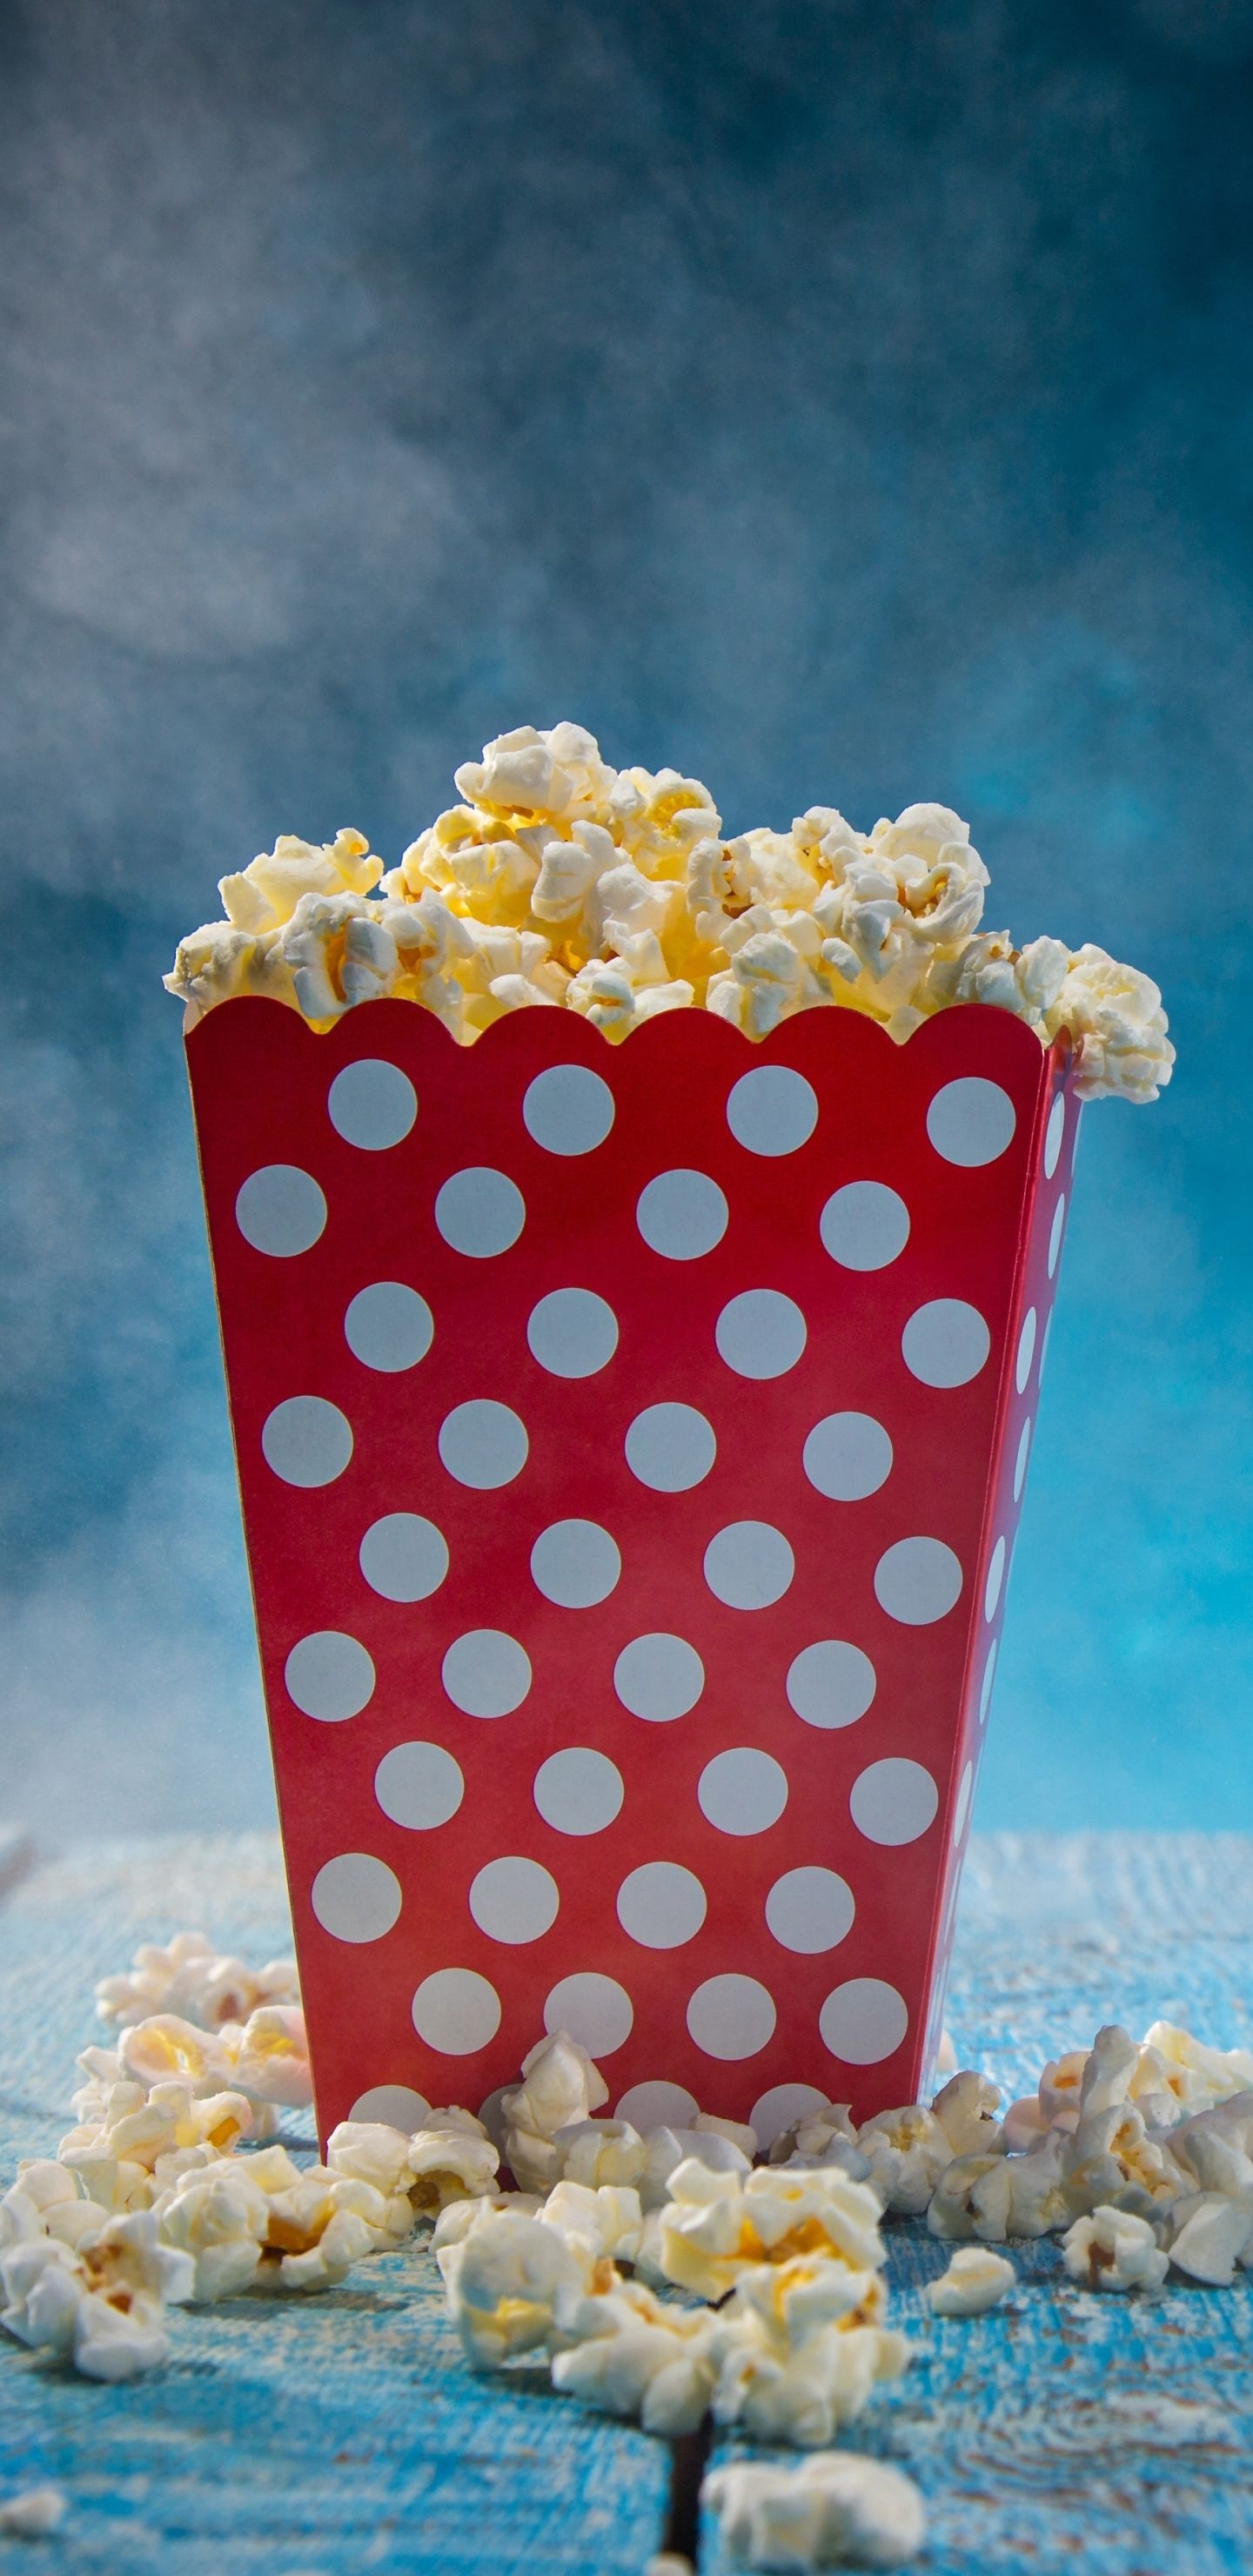 Delicious popcorn treats, Popcorn varieties, Popping kernels, Mouth-watering snack, 1440x2960 HD Phone